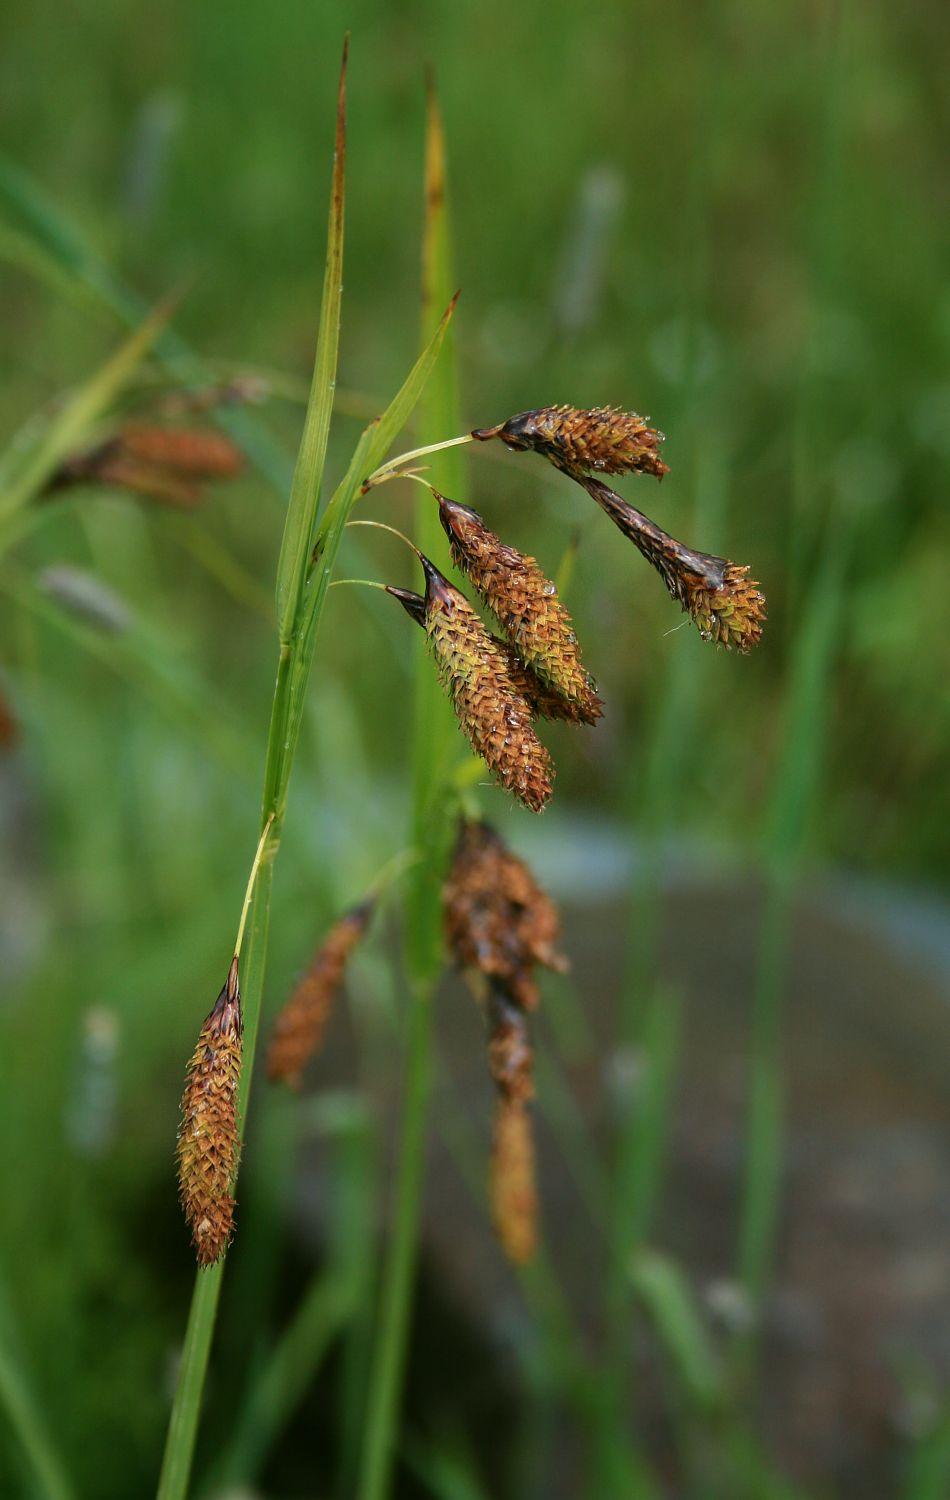 orange-brown spikelets with green leaves and stems